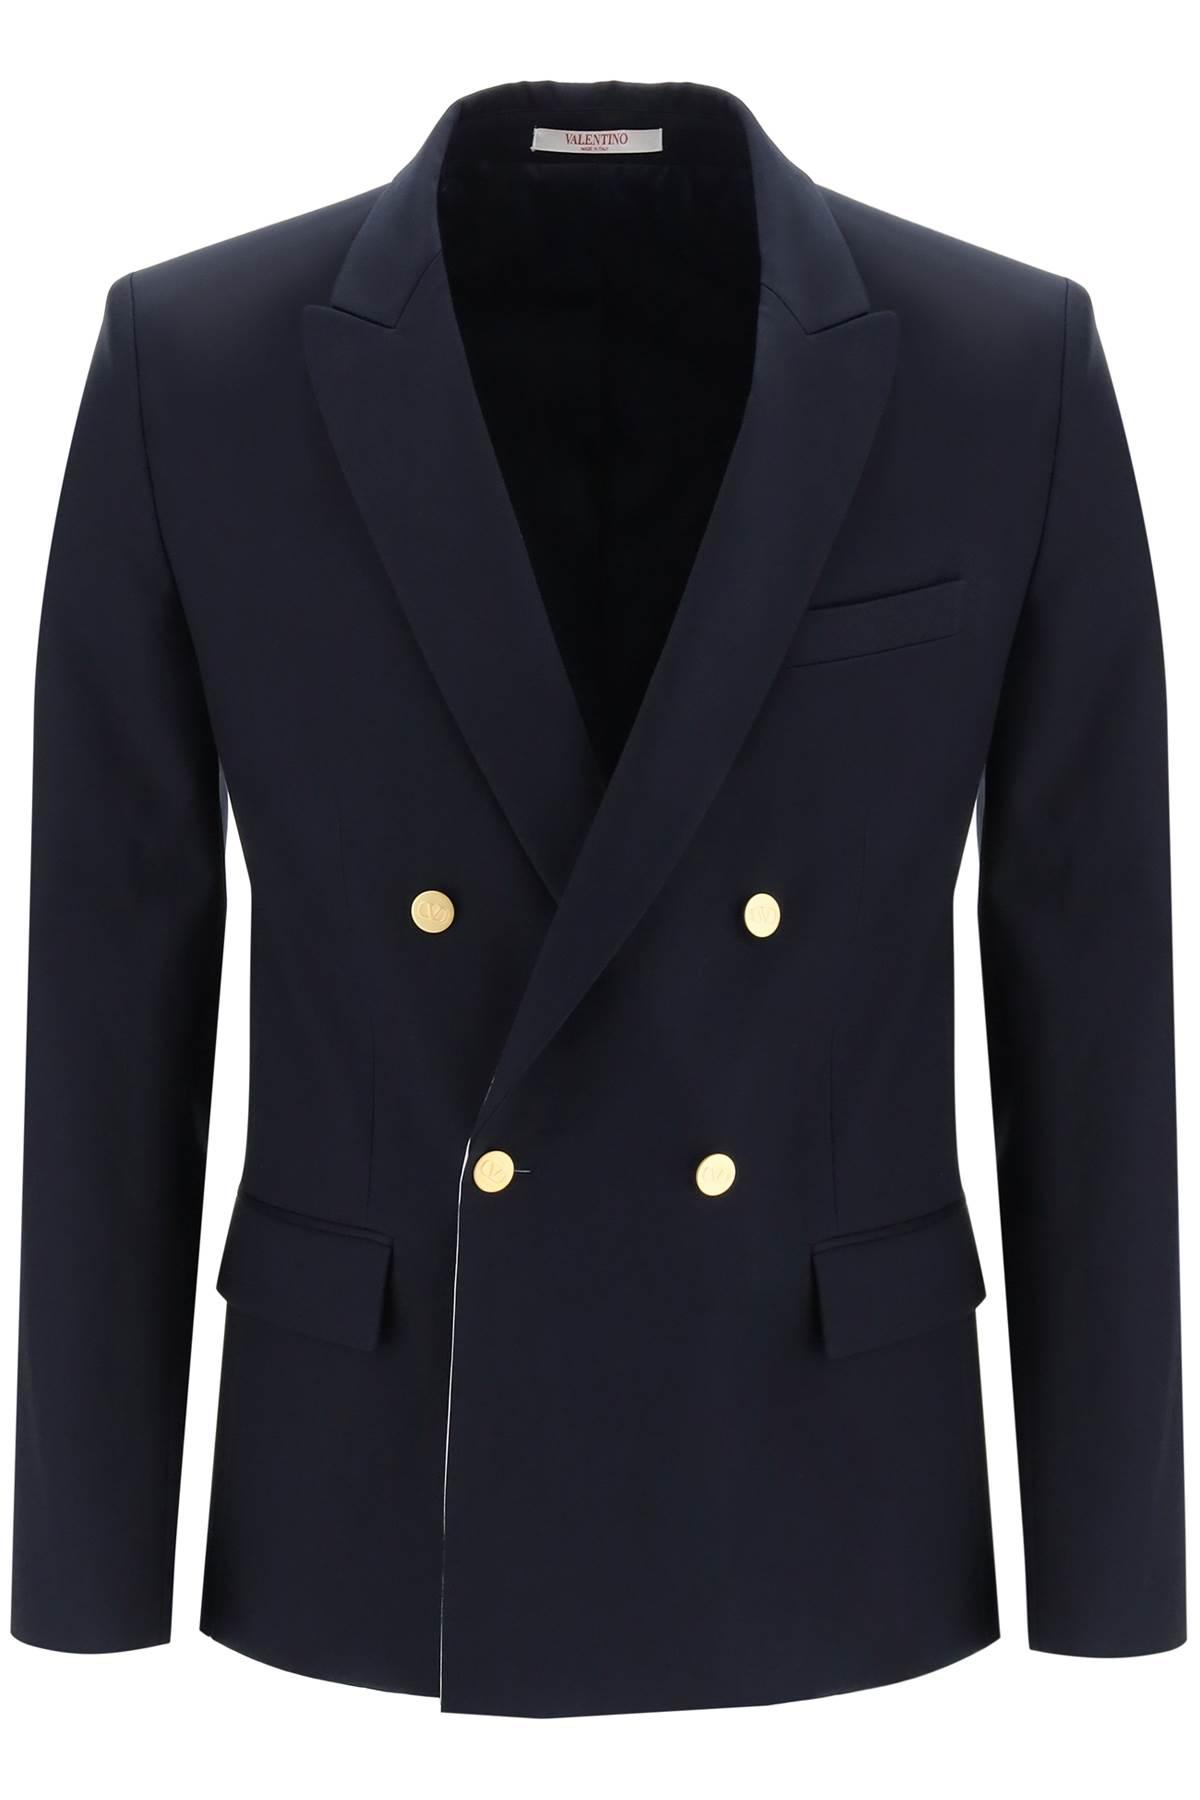 VALENTINO DROUBLE-BREASTED BLAZER WITH REAR VENTS